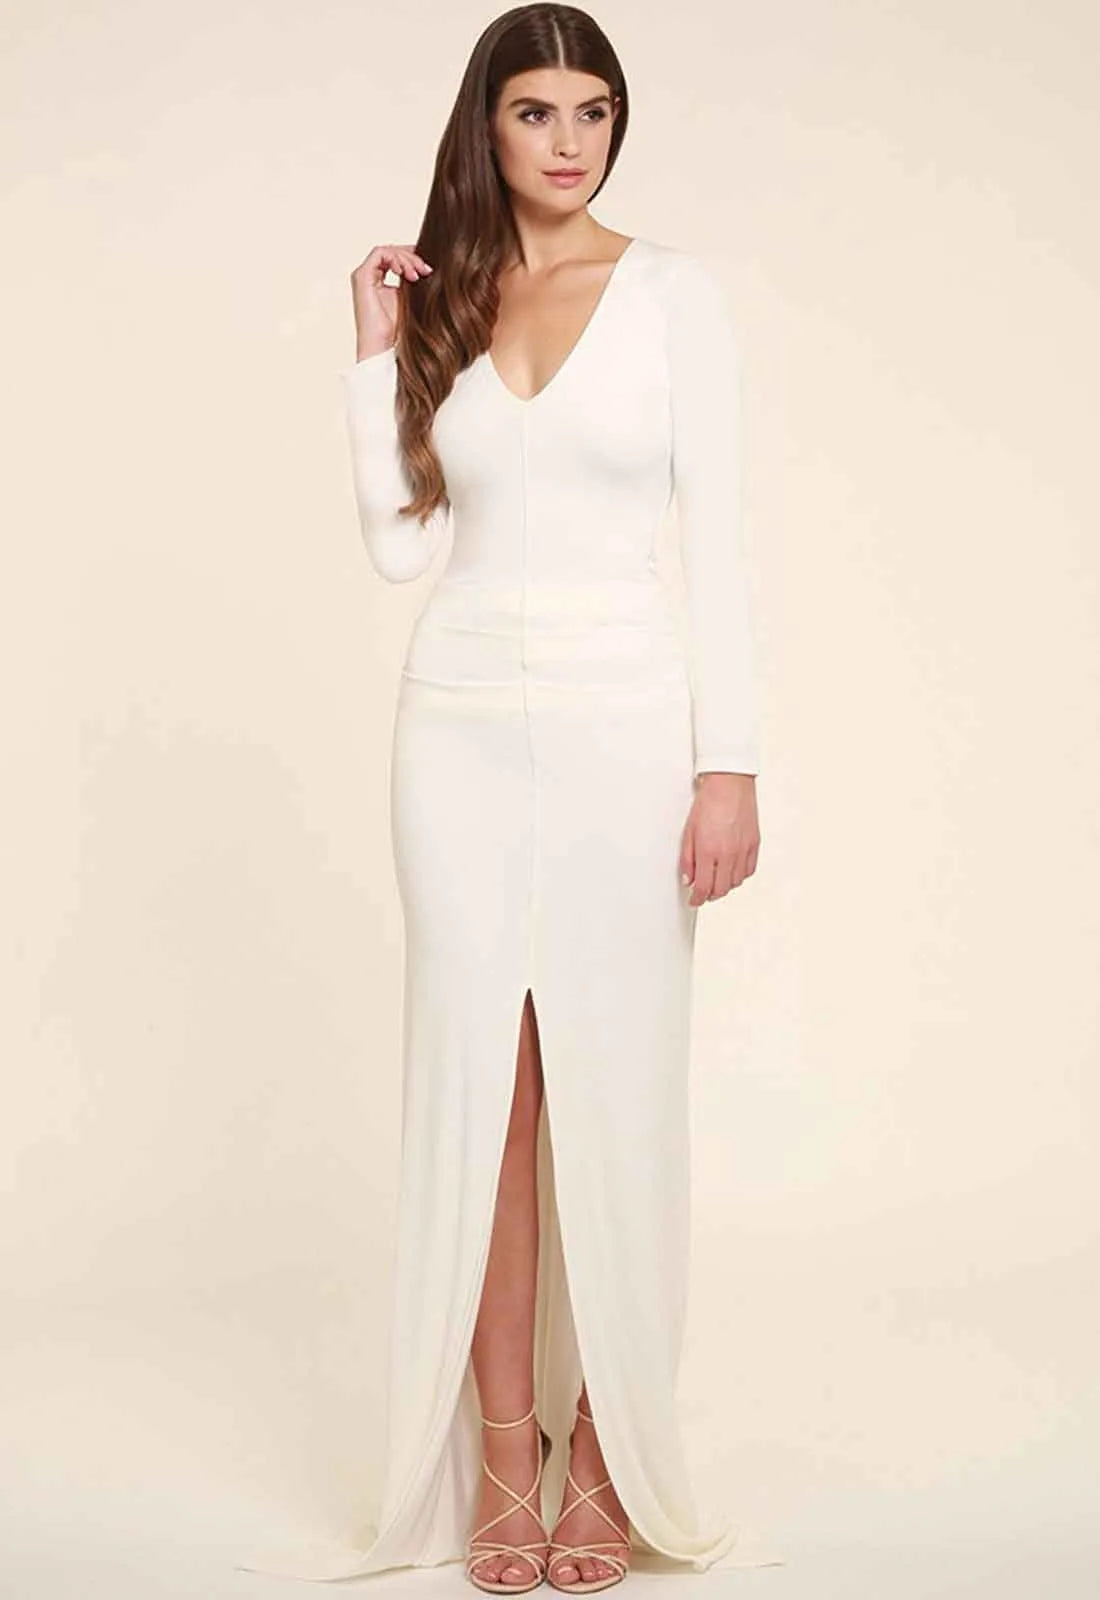 Honor Gold Jessica Long Sleeve Maxi Dress in White-23905